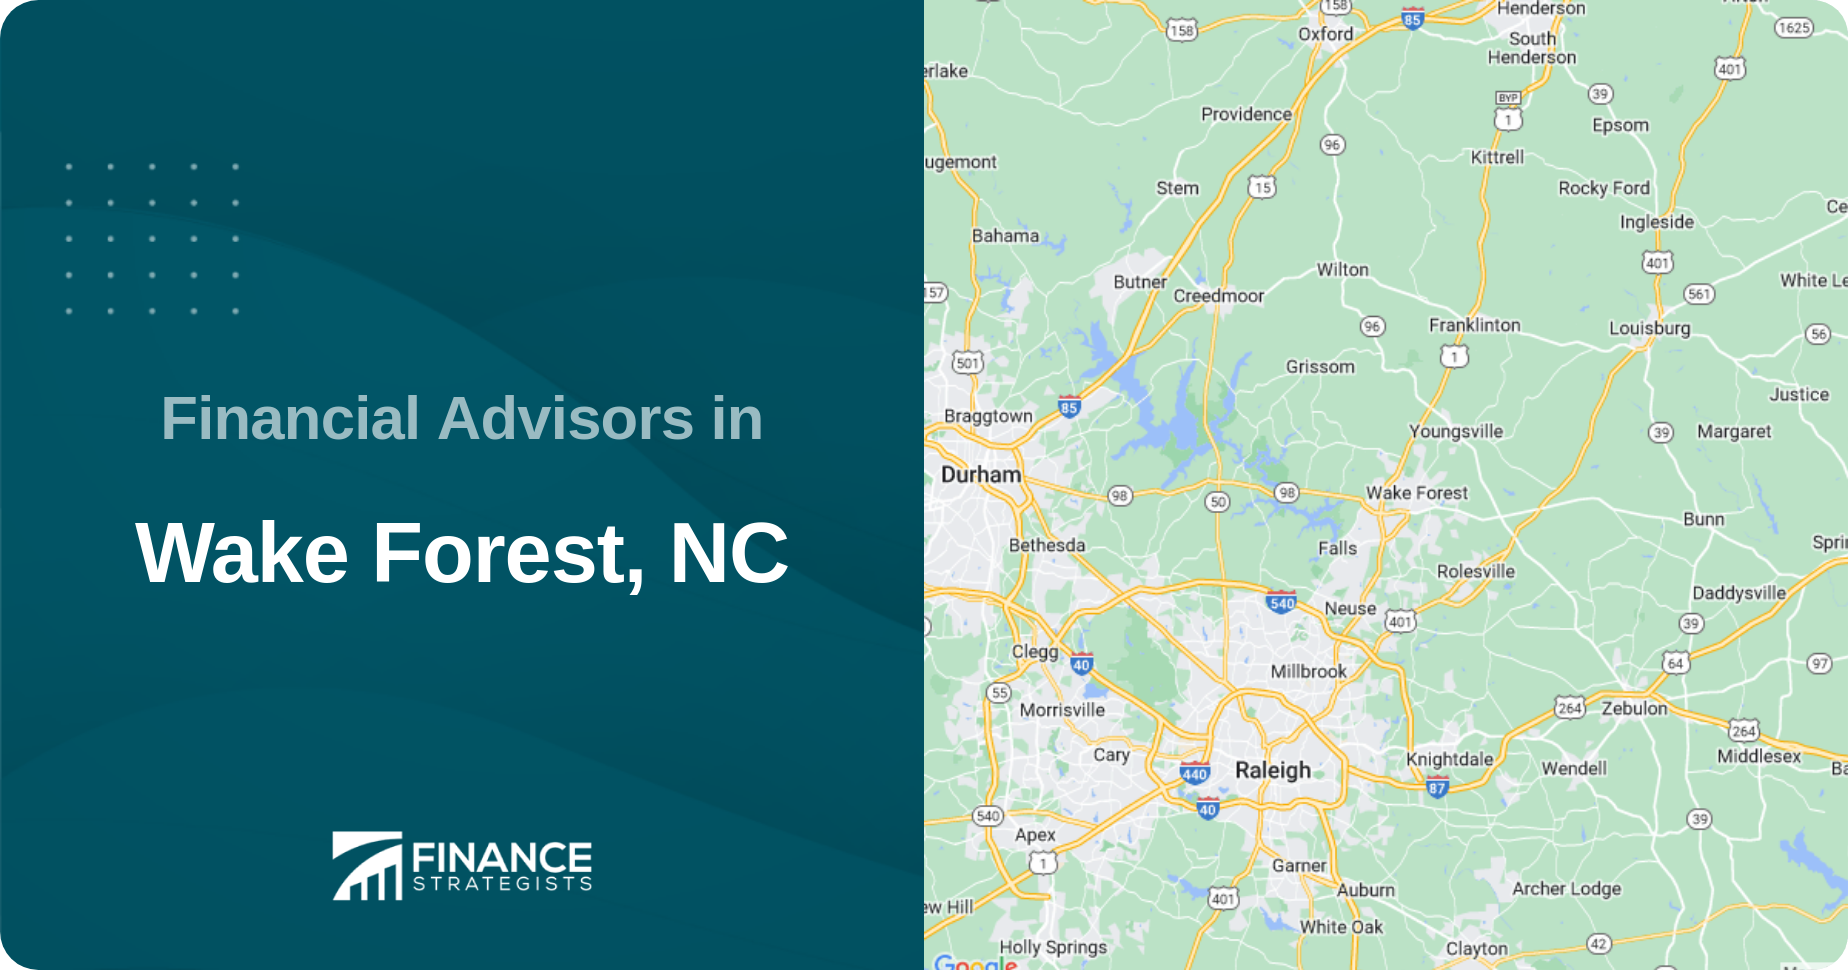 Financial Advisors in Wake Forest, NC